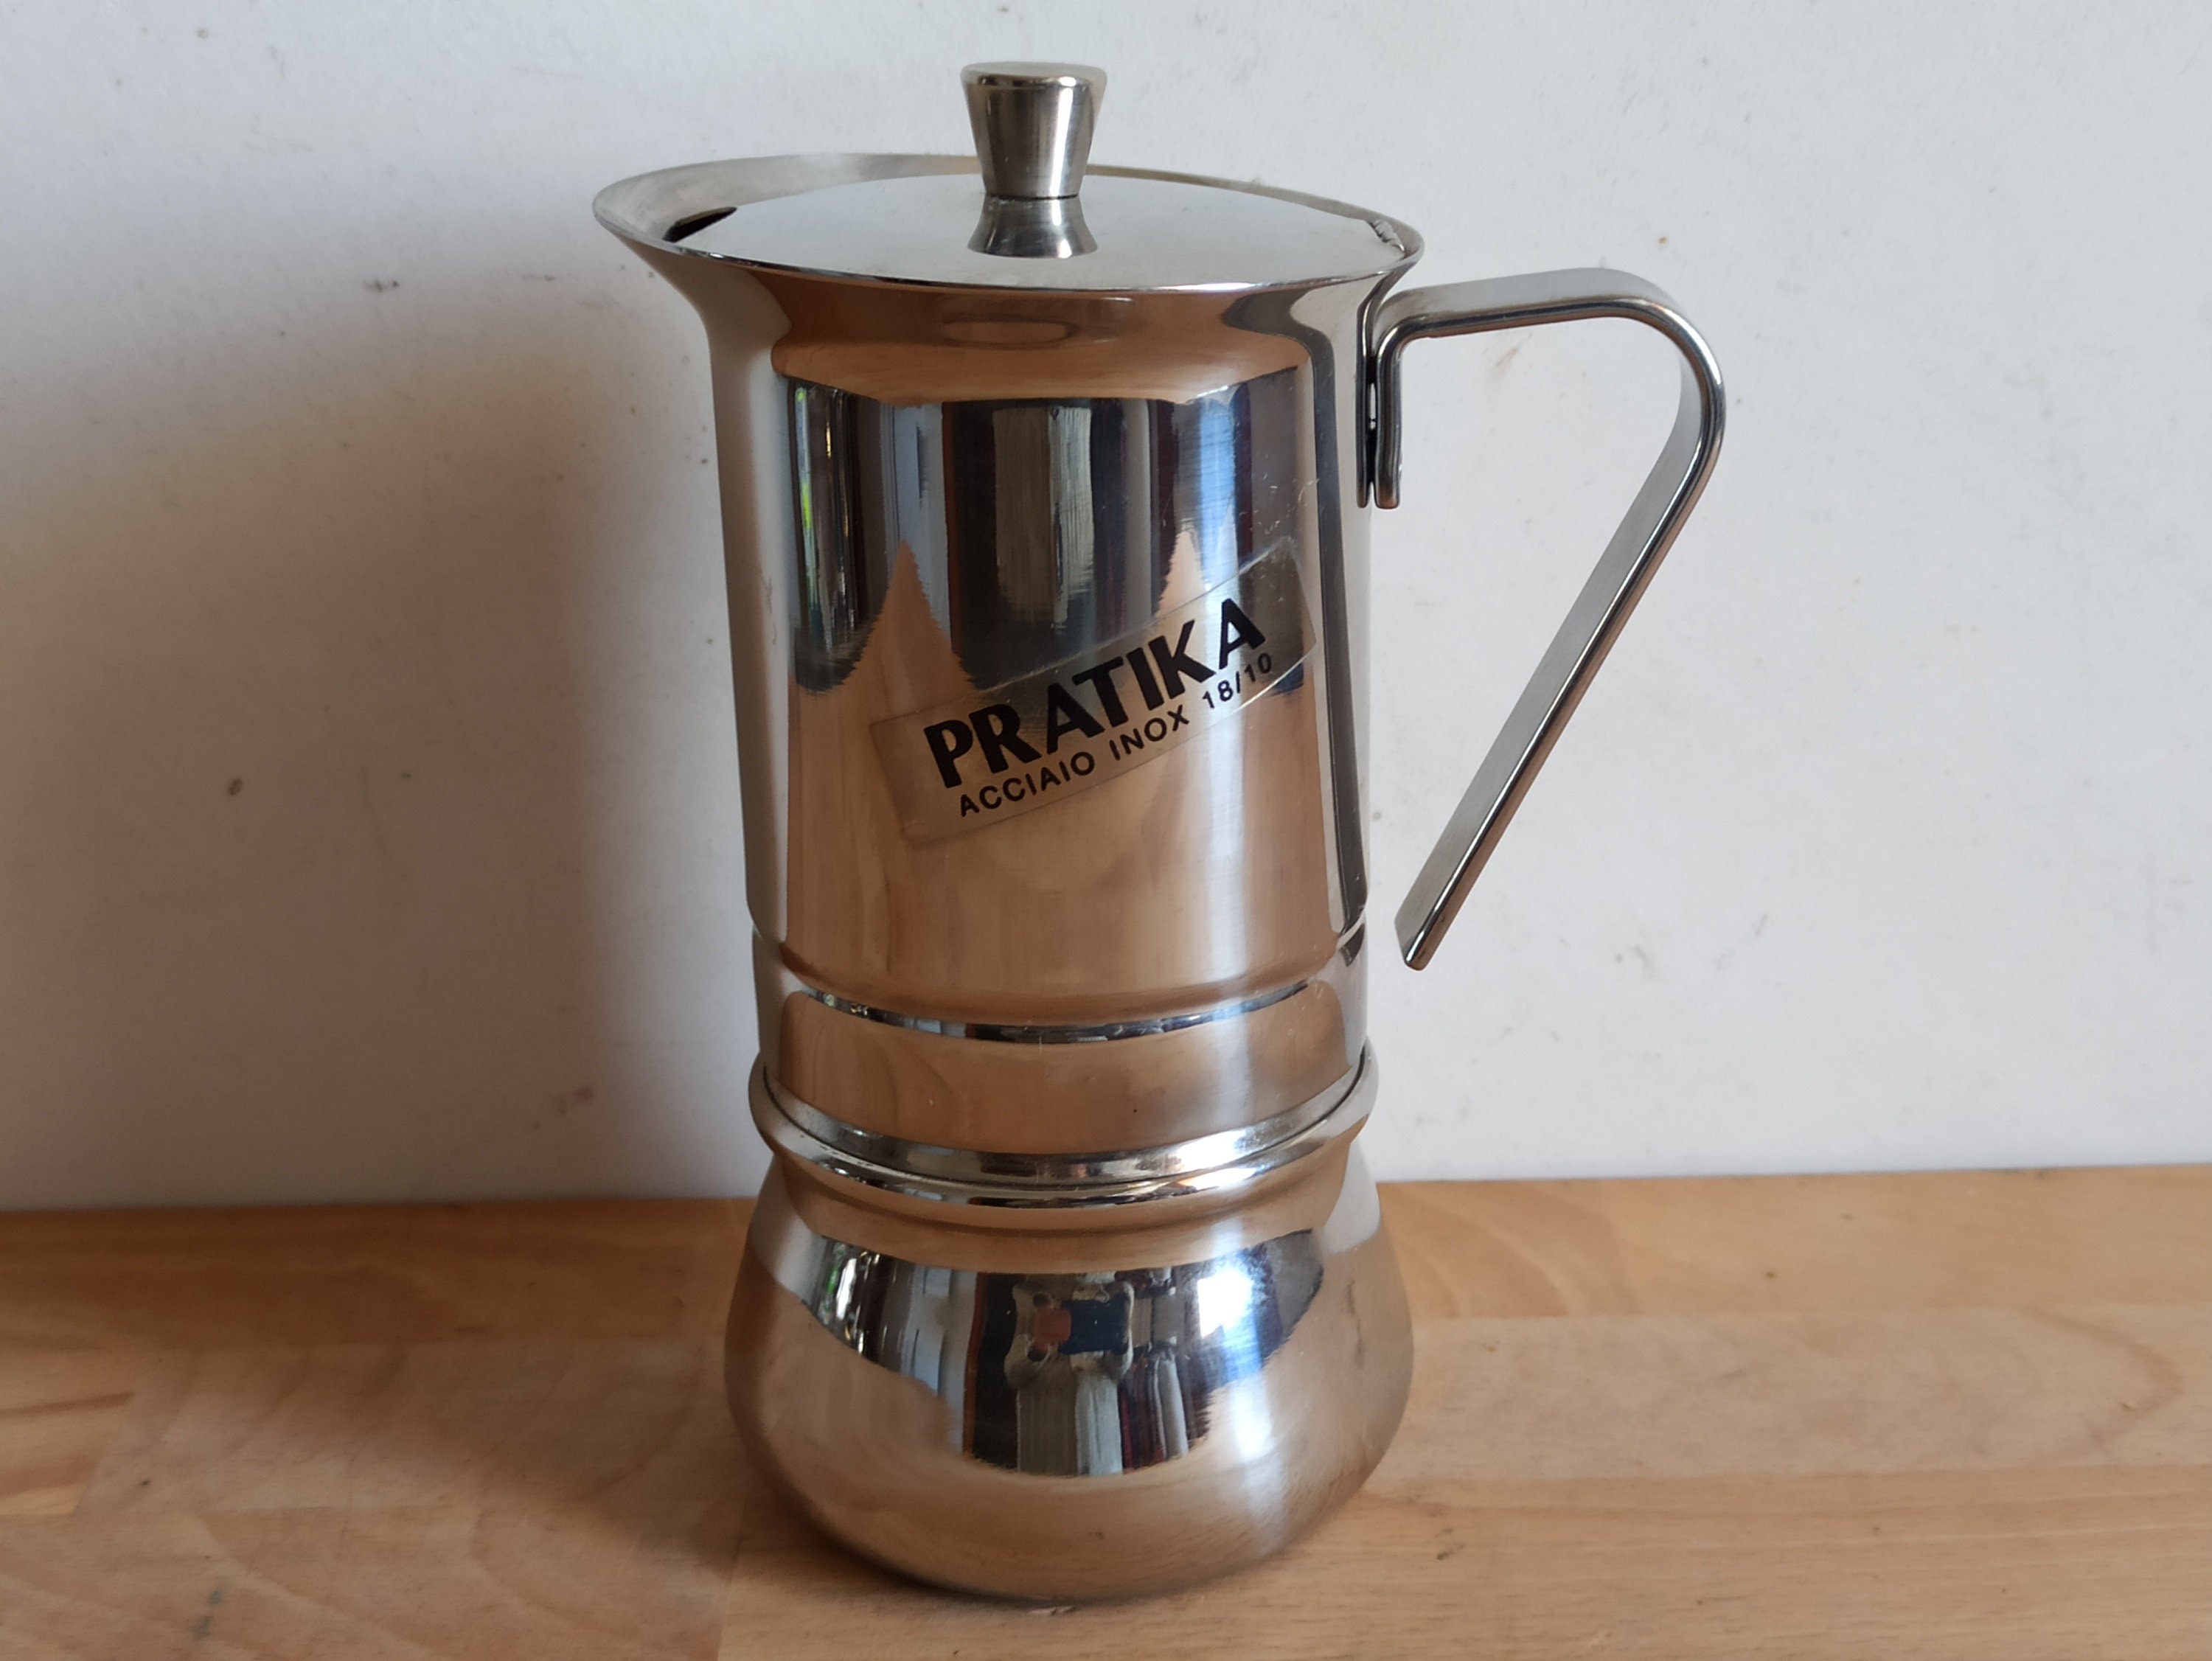 G.A.T Inox 18/10 Stovetop Espresso Maker 6 Cups Vintage Italy Stainless  Steel